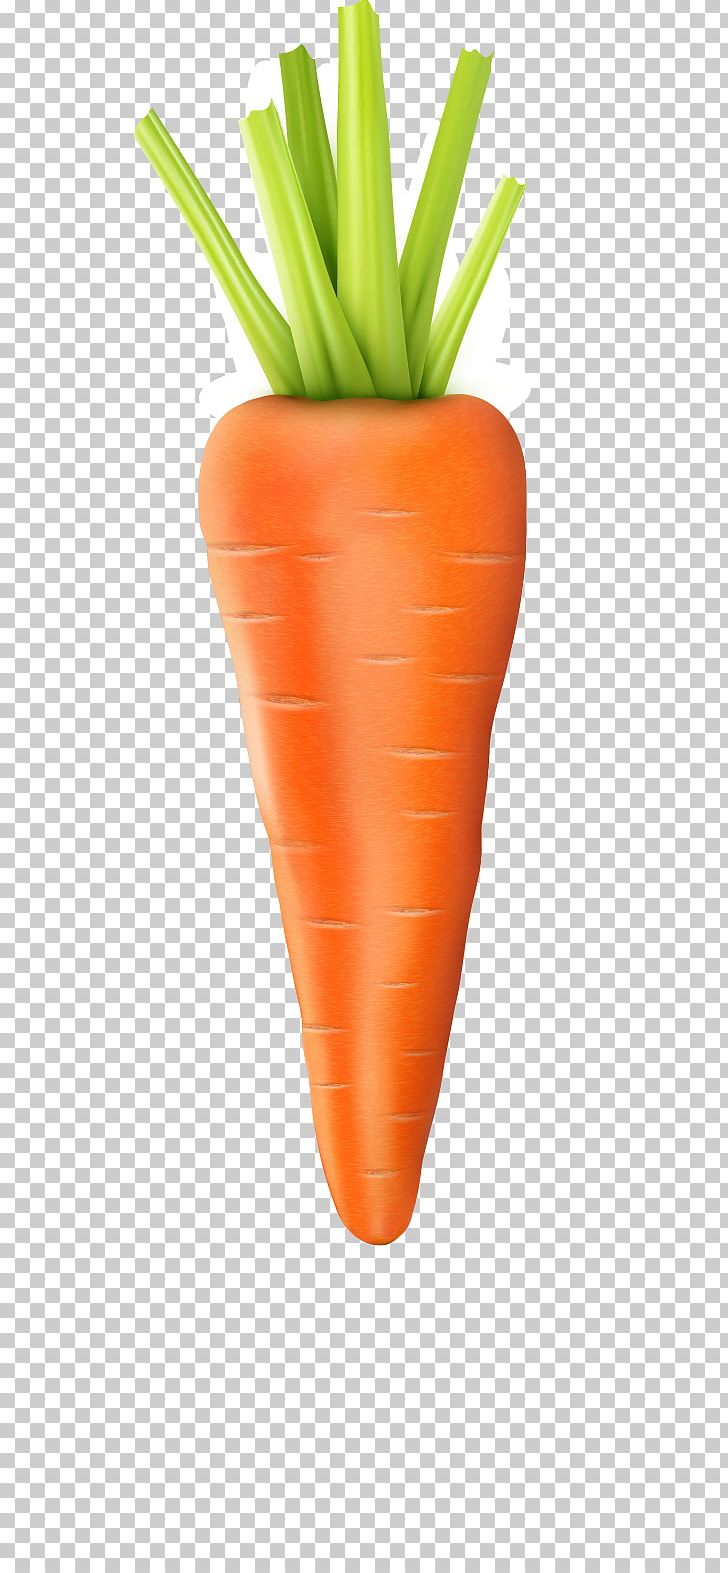 Baby Carrot Vegetable PNG, Clipart, Bunch Of Carrots, Carrot, Carrot Cartoon, Carrot Creative, Carrot Juice Free PNG Download